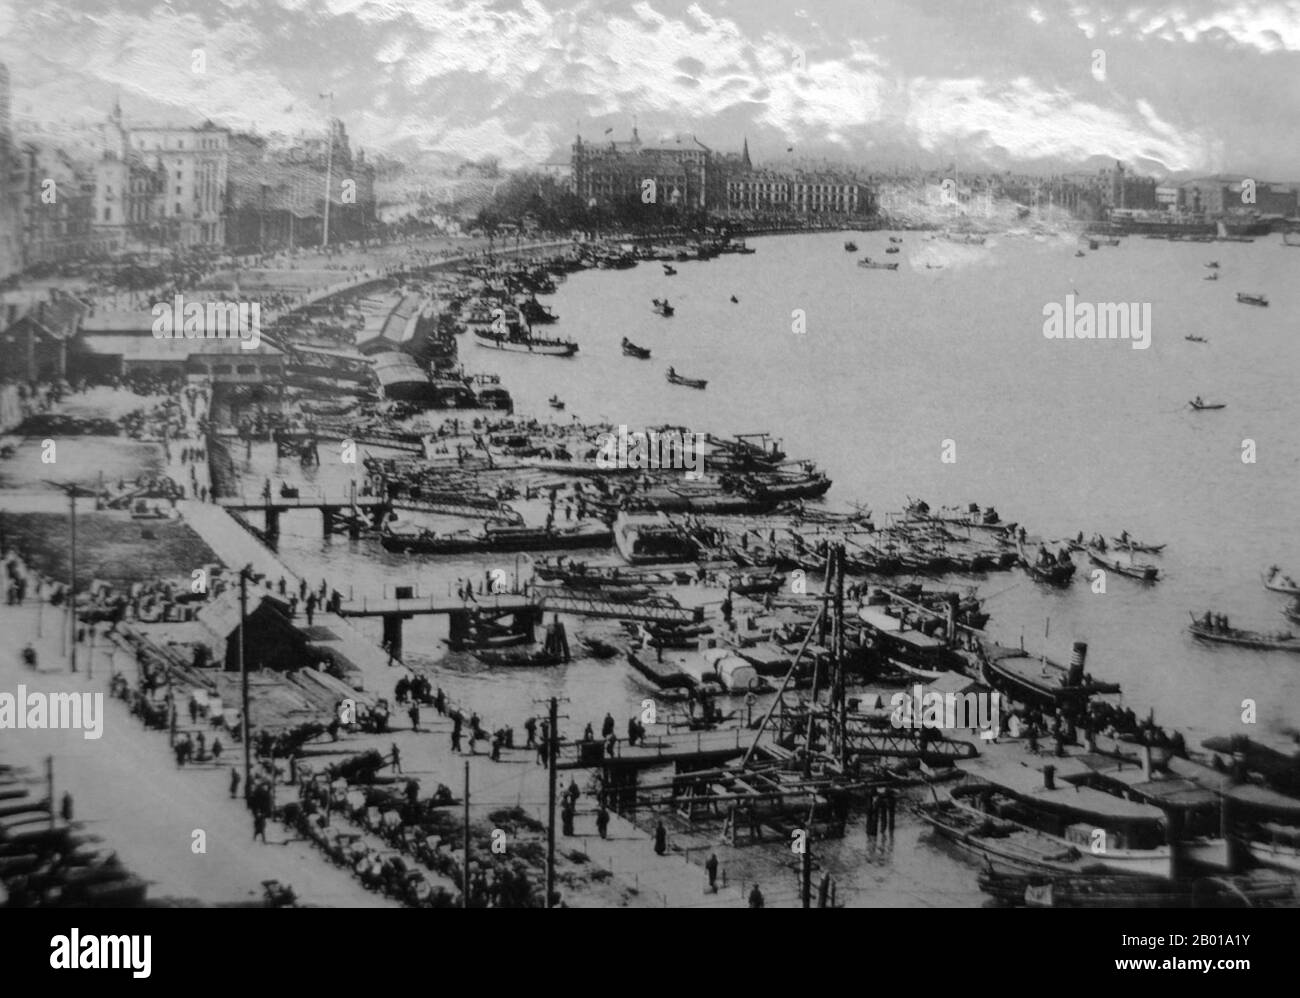 China: A long view of the Shanghai Bund (Waitan), c. 1925.  The Bund (Chinese: Wàitān) is an area of Huangpu District in central Shanghai. The area centres on a section of Zhongshan Road (East-1 Zhongshan Road) within the former Shanghai International Settlement, which runs along the western bank of the Huangpu River, facing Pudong, in the eastern part of Huangpu District. The Bund usually refers to the buildings and wharves on this section of the road, as well as some adjacent areas. Stock Photo